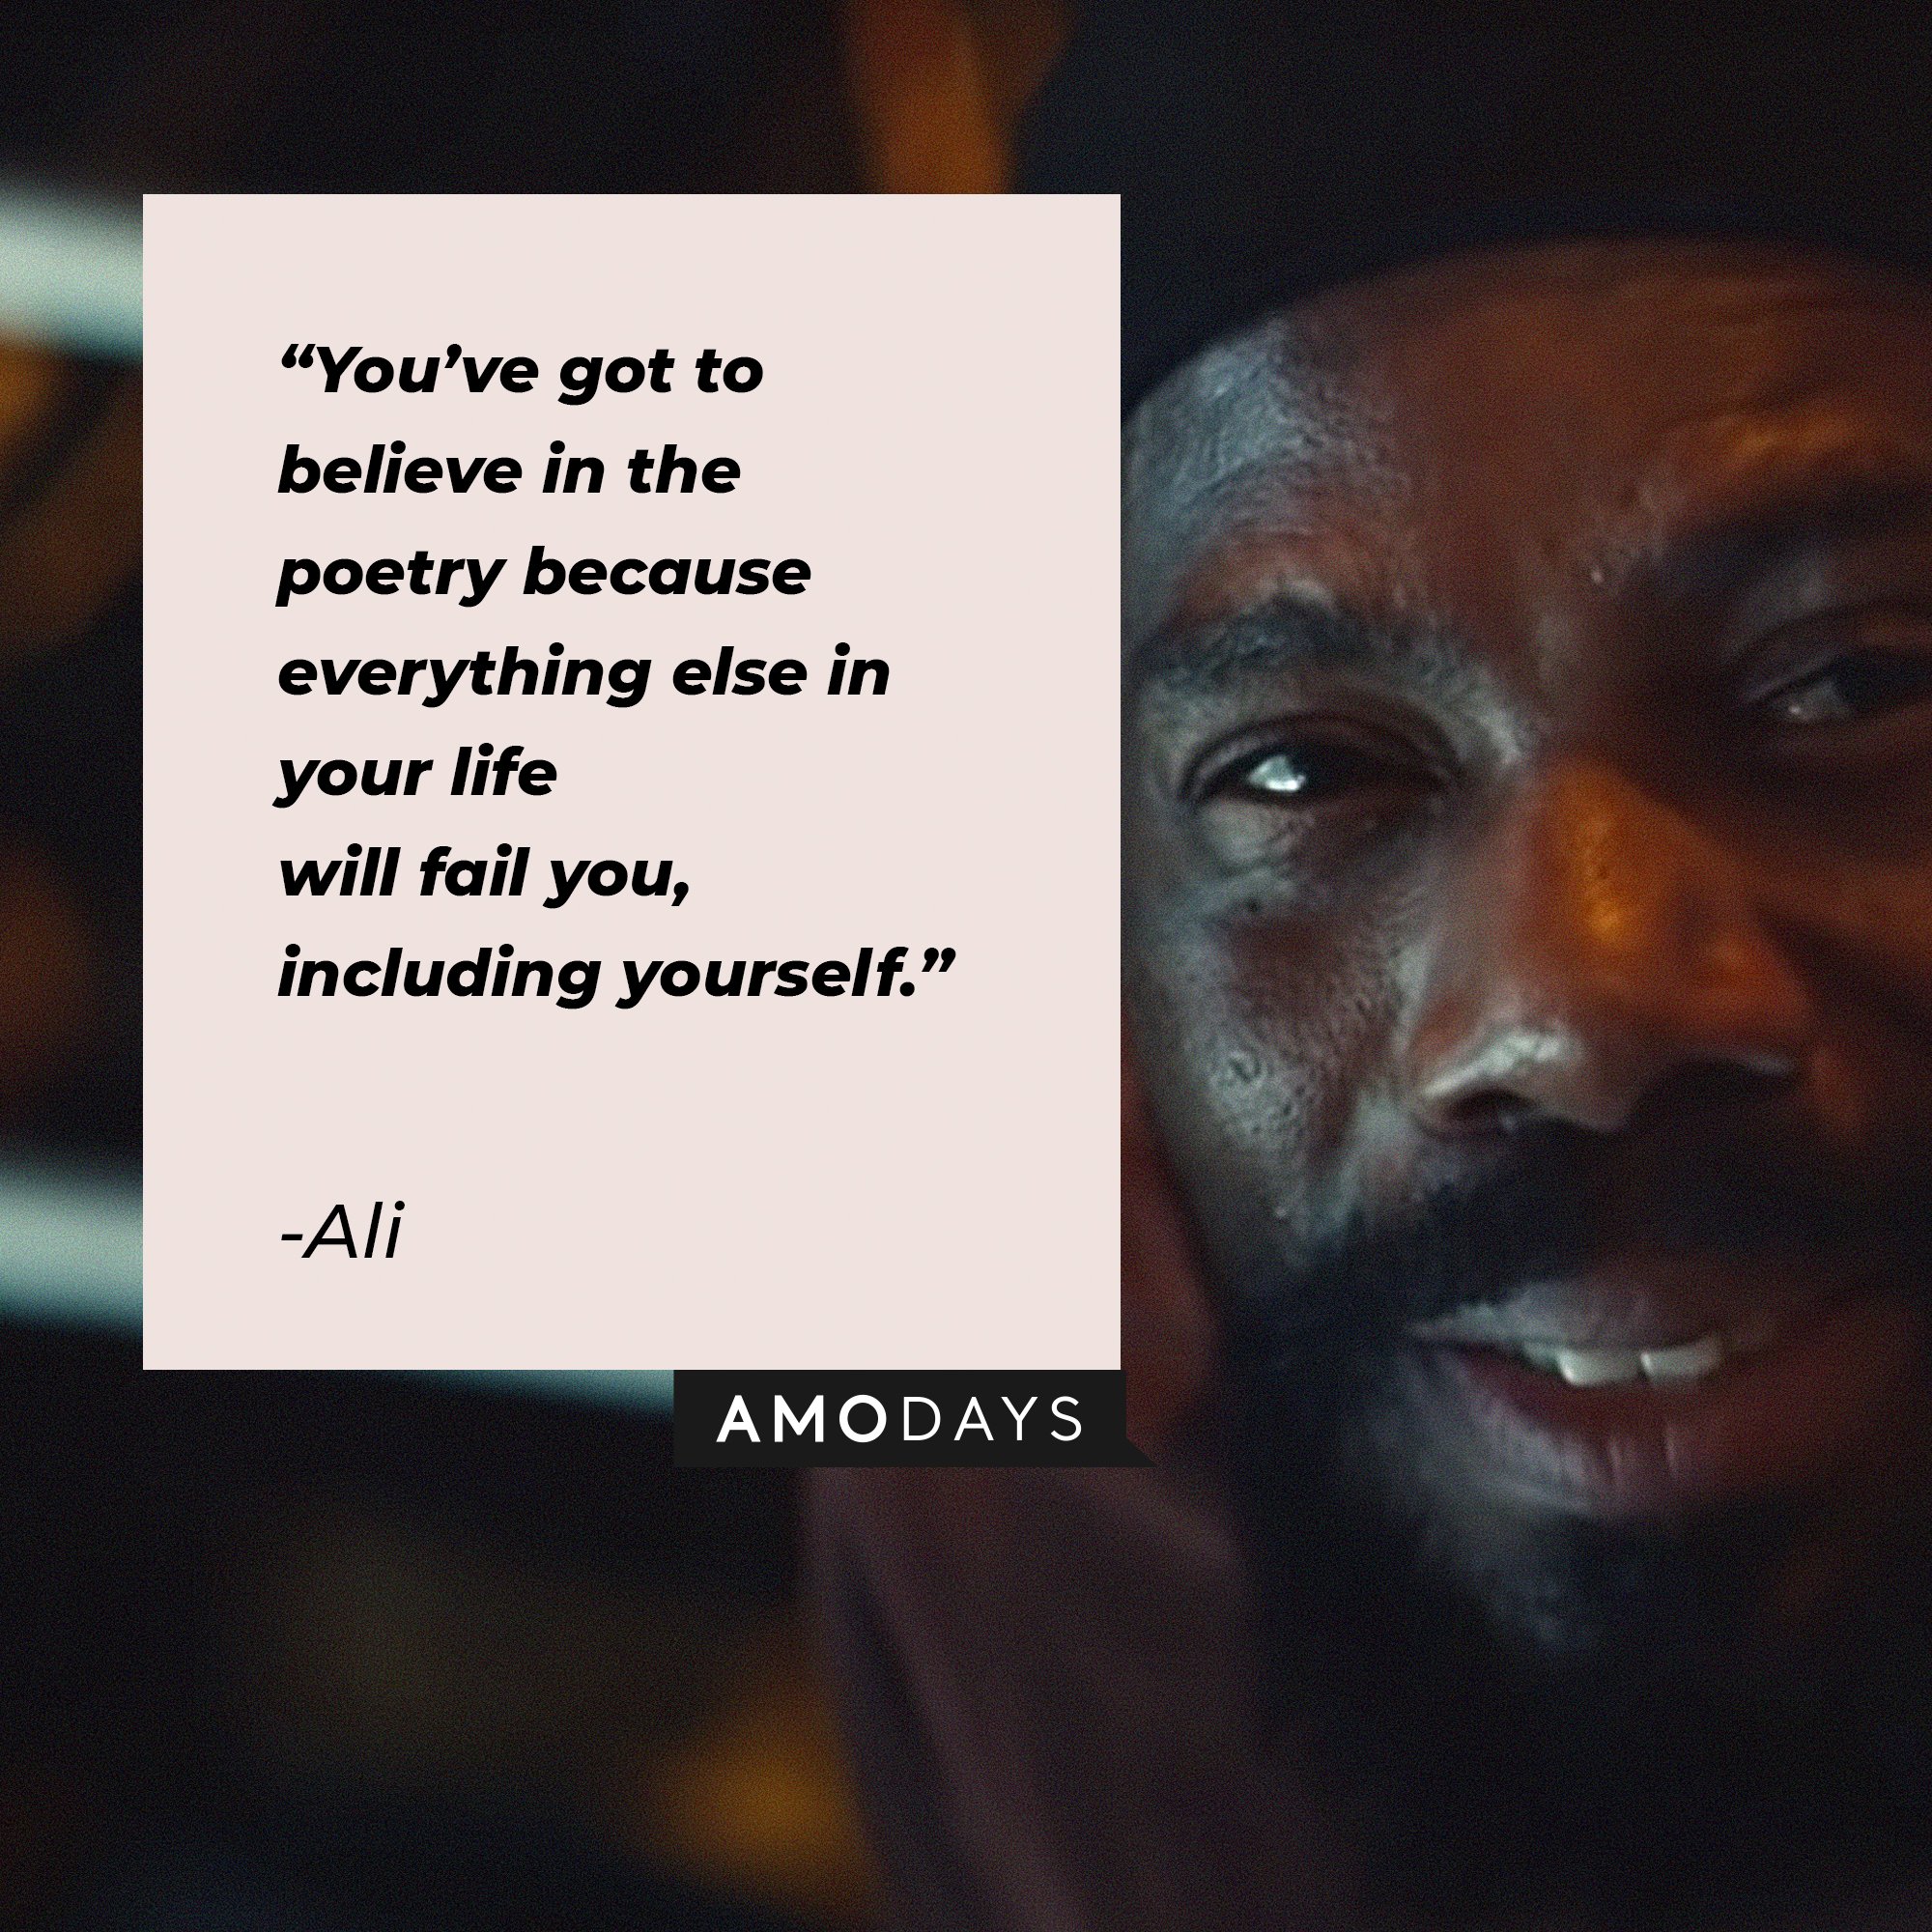 Ali’s quote: “You’ve got to believe in the poetry because everything else in your life will fail you, including yourself.” | Image: AmoDays